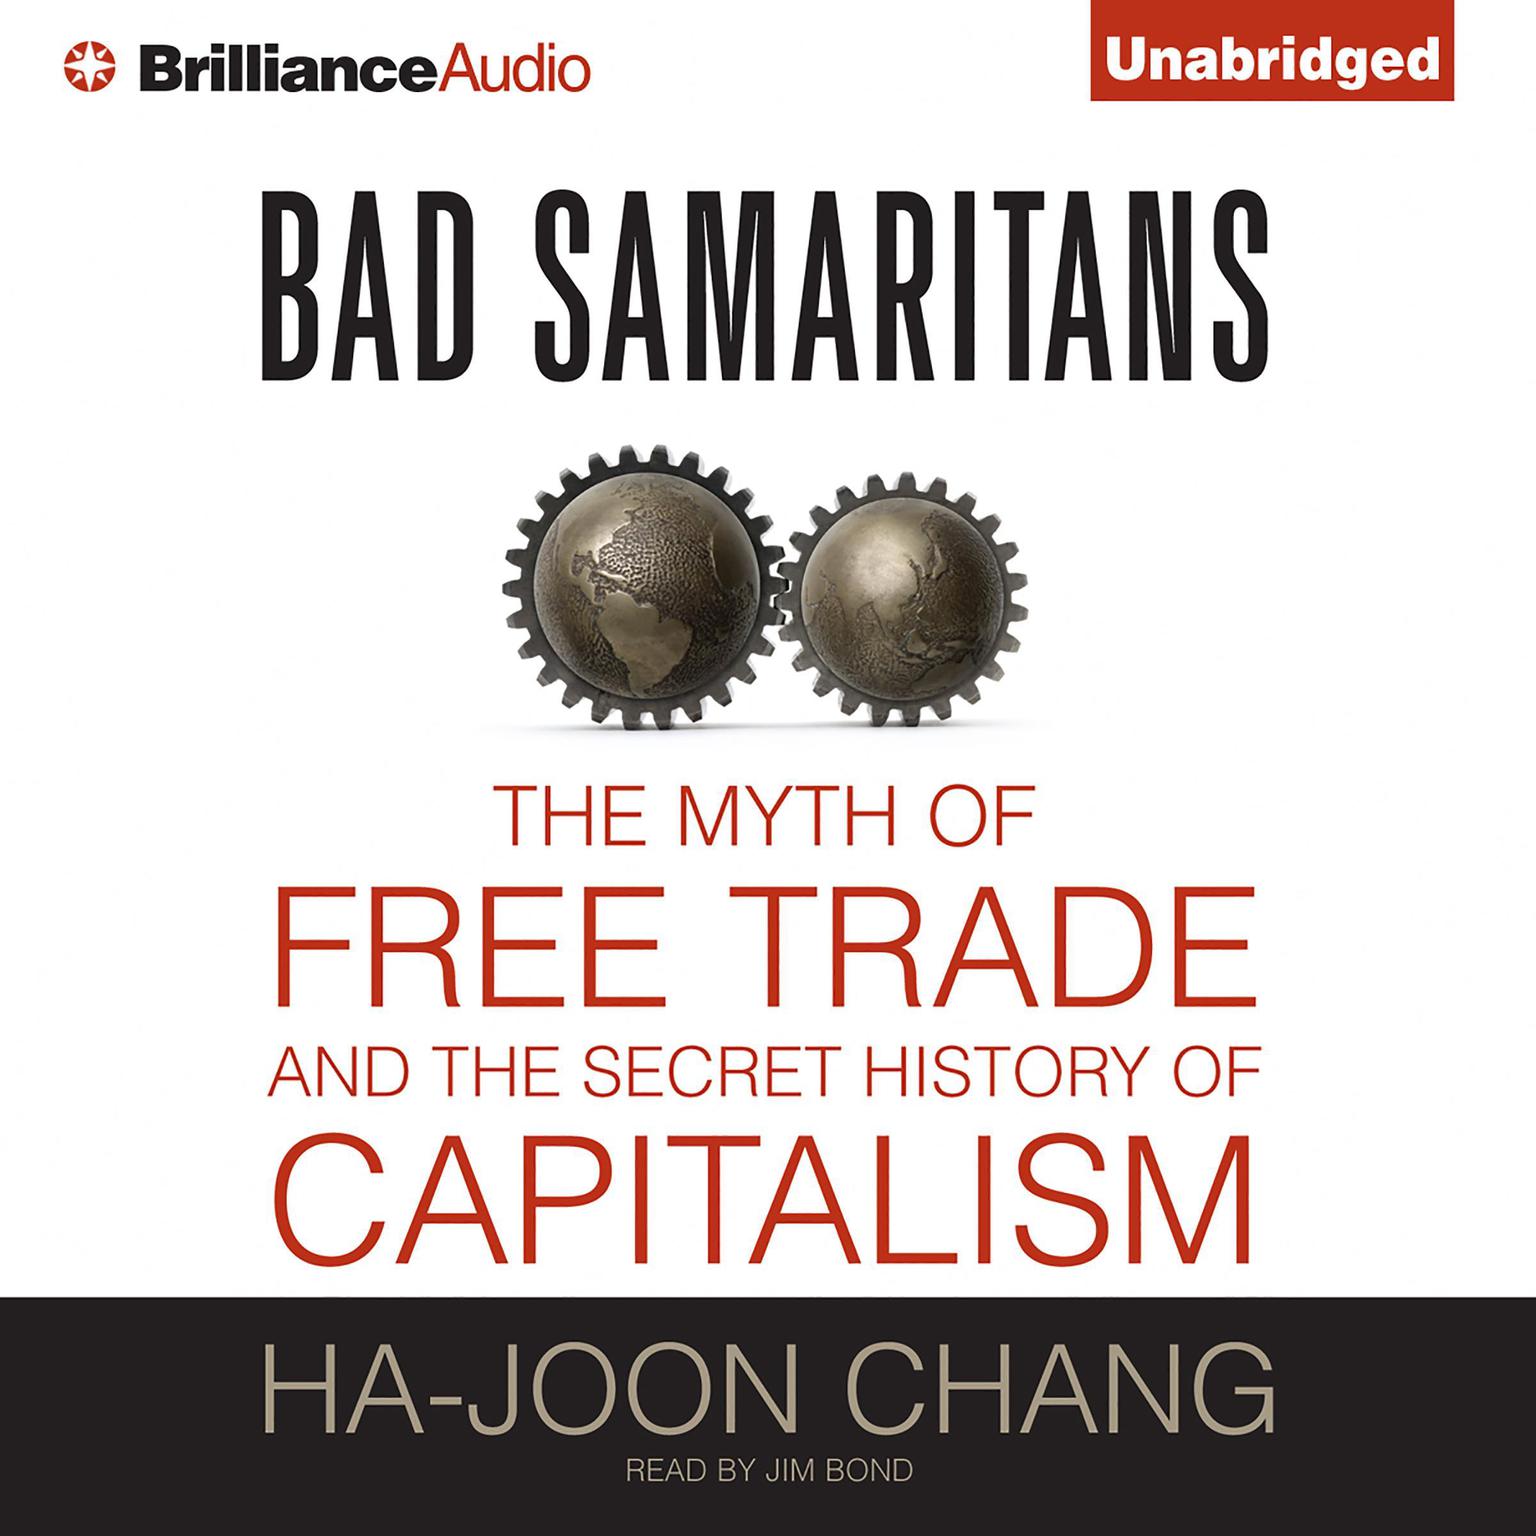 Bad Samaritans: The Myth of Free Trade and the Secret History of Capitalism Audiobook, by Ha-Joon Chang